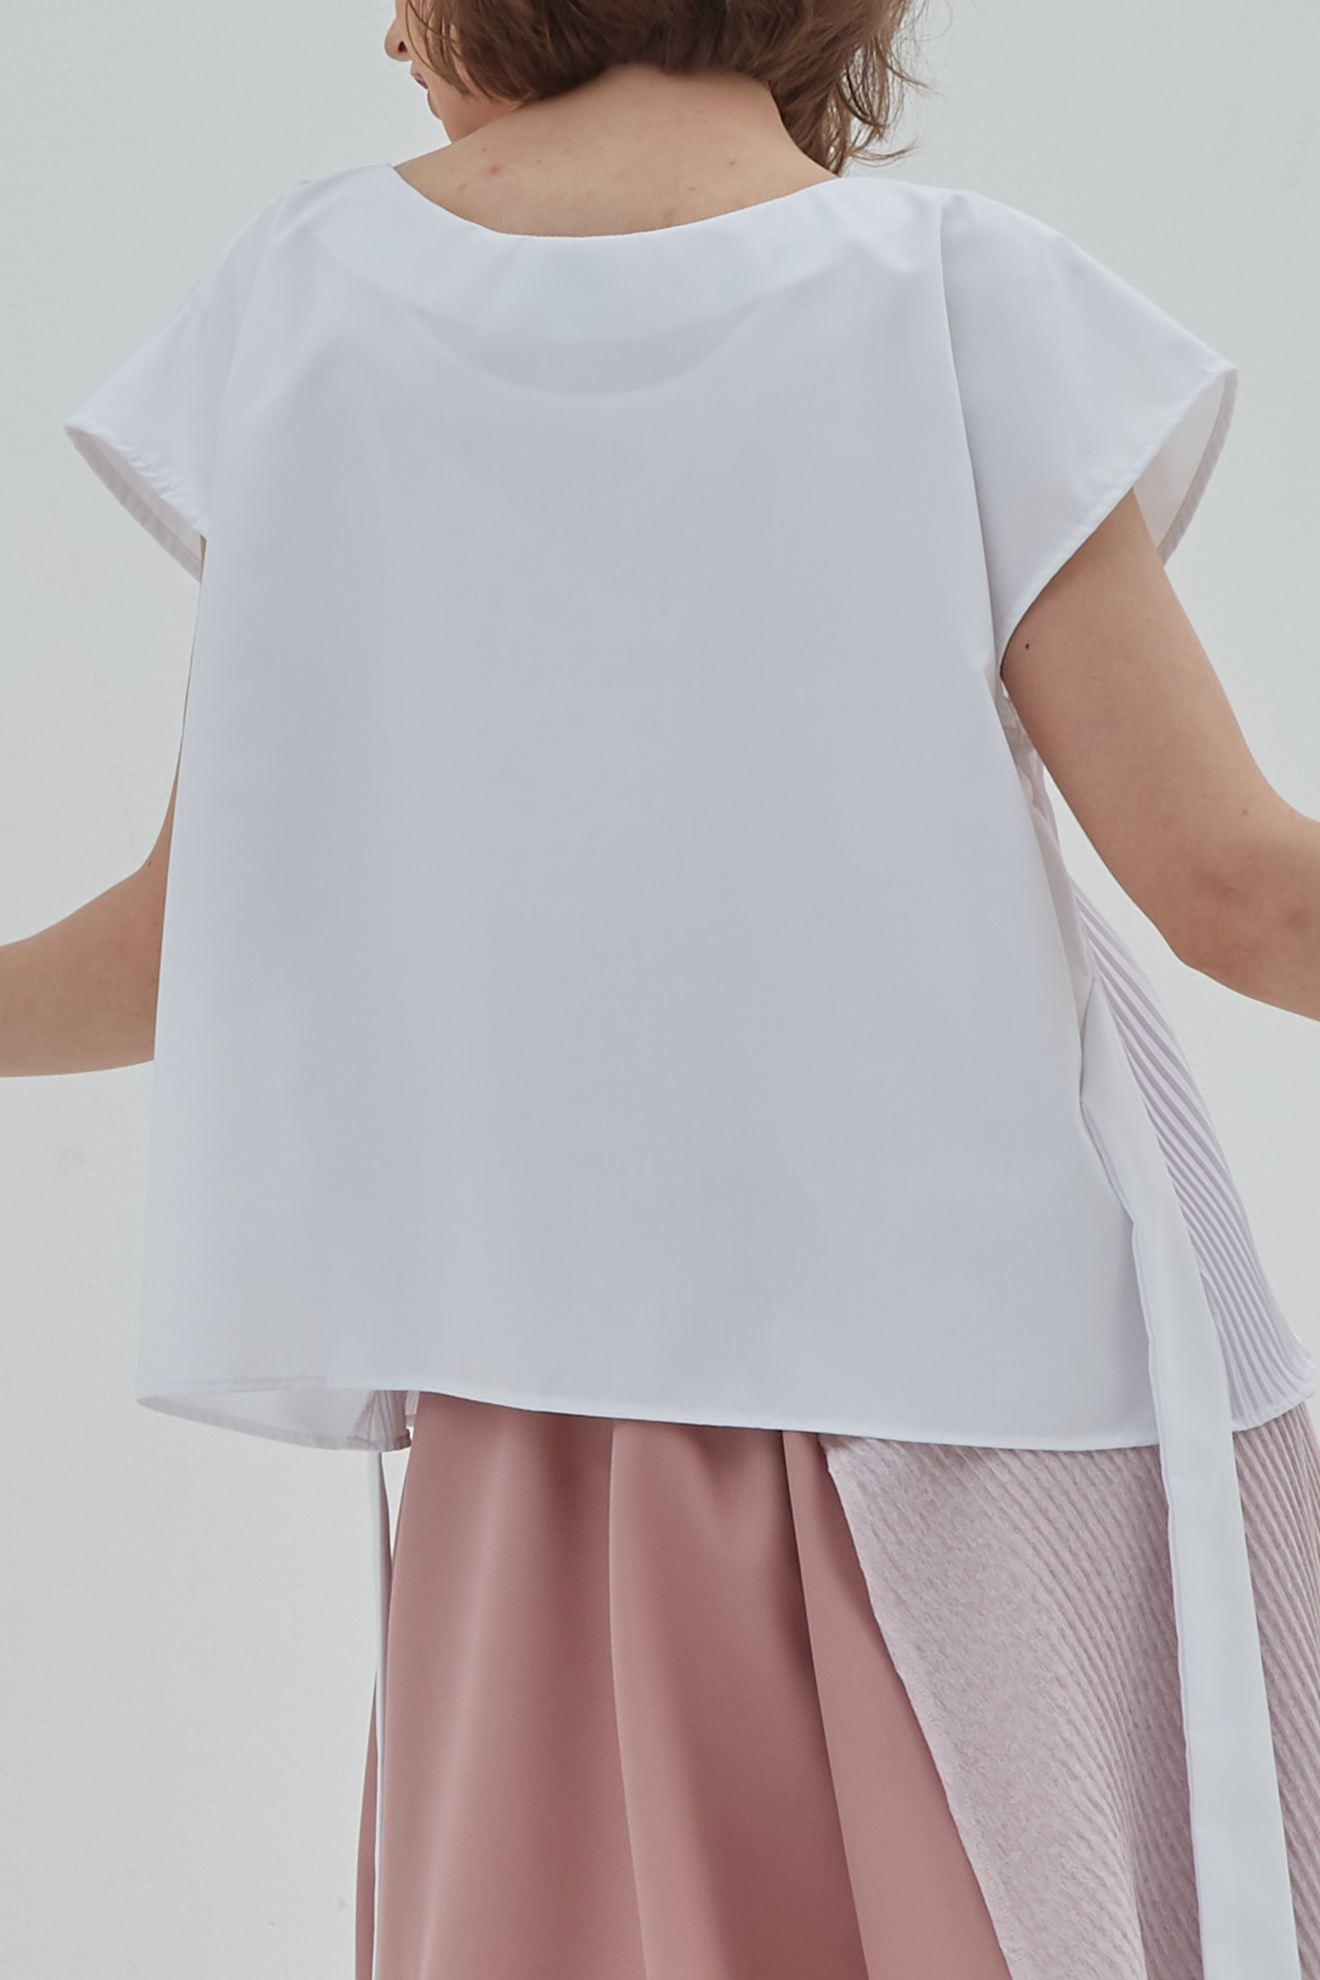 Picture of Prisca Blouse Ivory 